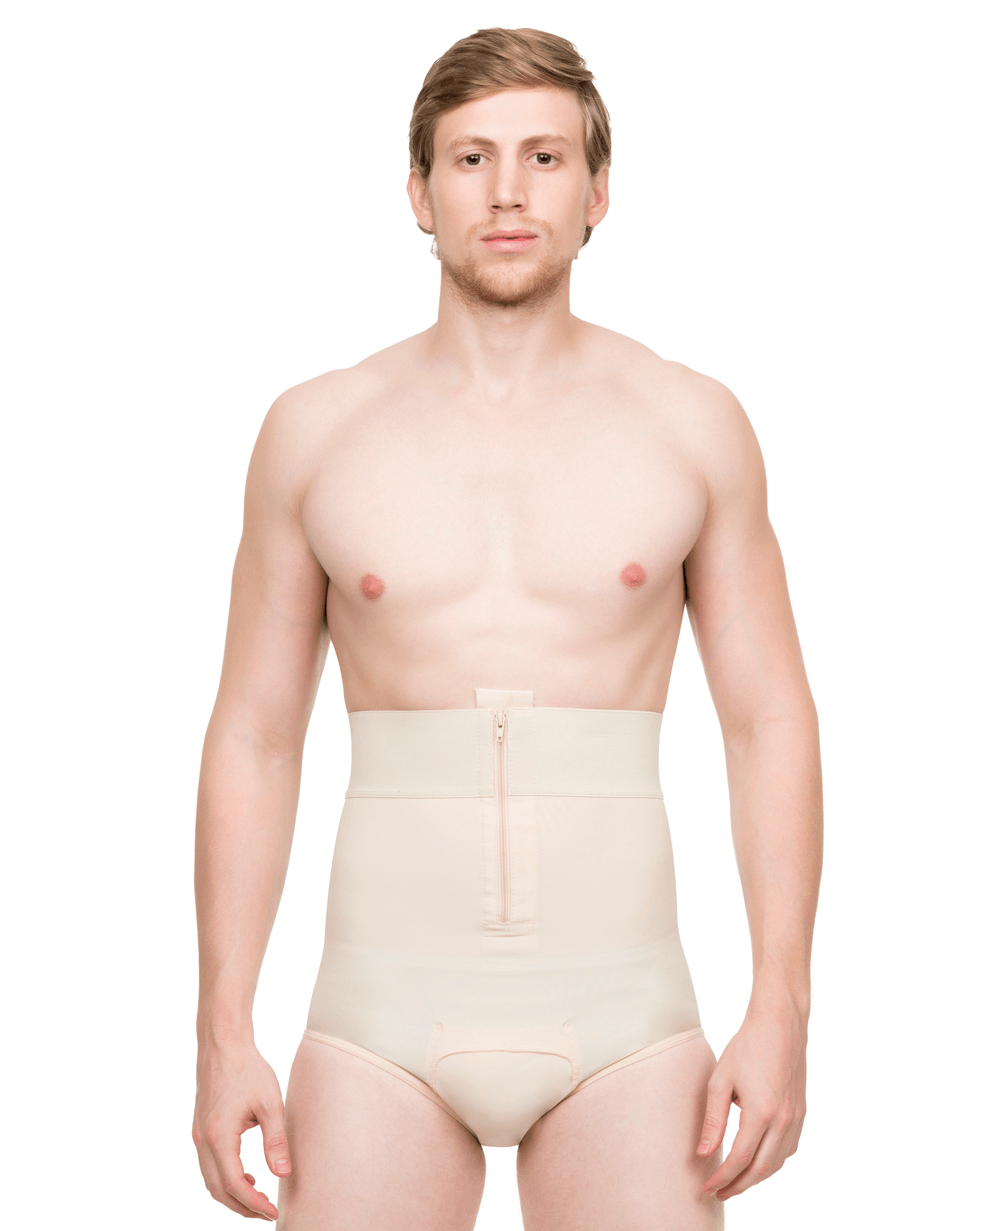 Male High-Waist Abdominal Cosmetic Surgery Compression Brief with Zippers (MG01) - Isavela Compression Garments